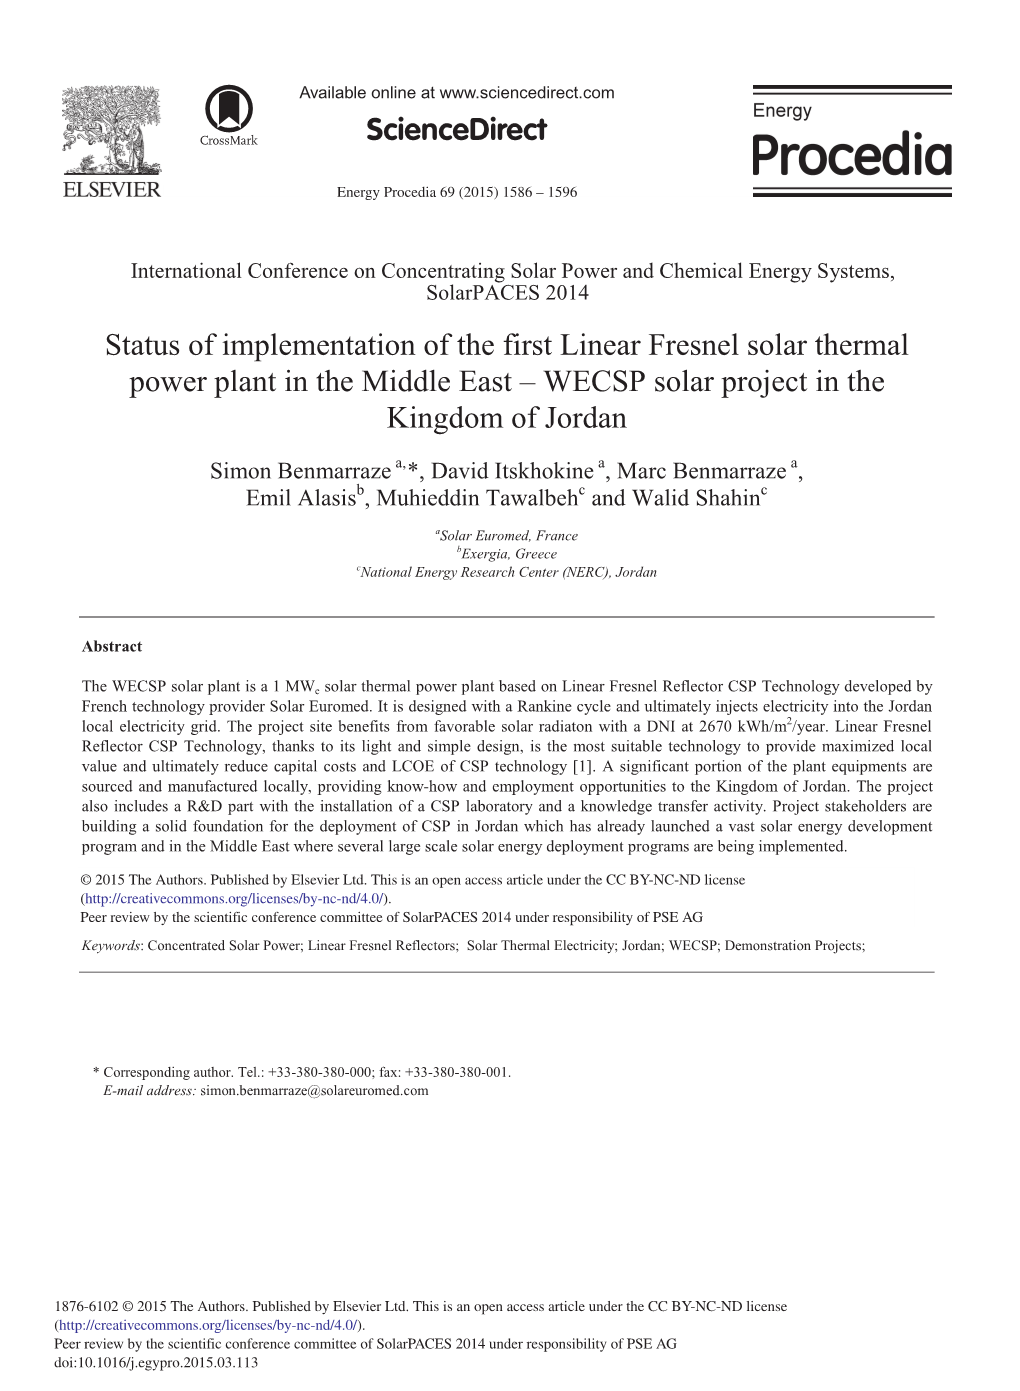 Status of Implementation of the First Linear Fresnel Solar Thermal Power Plant in the Middle East – WECSP Solar Project in the Kingdom of Jordan